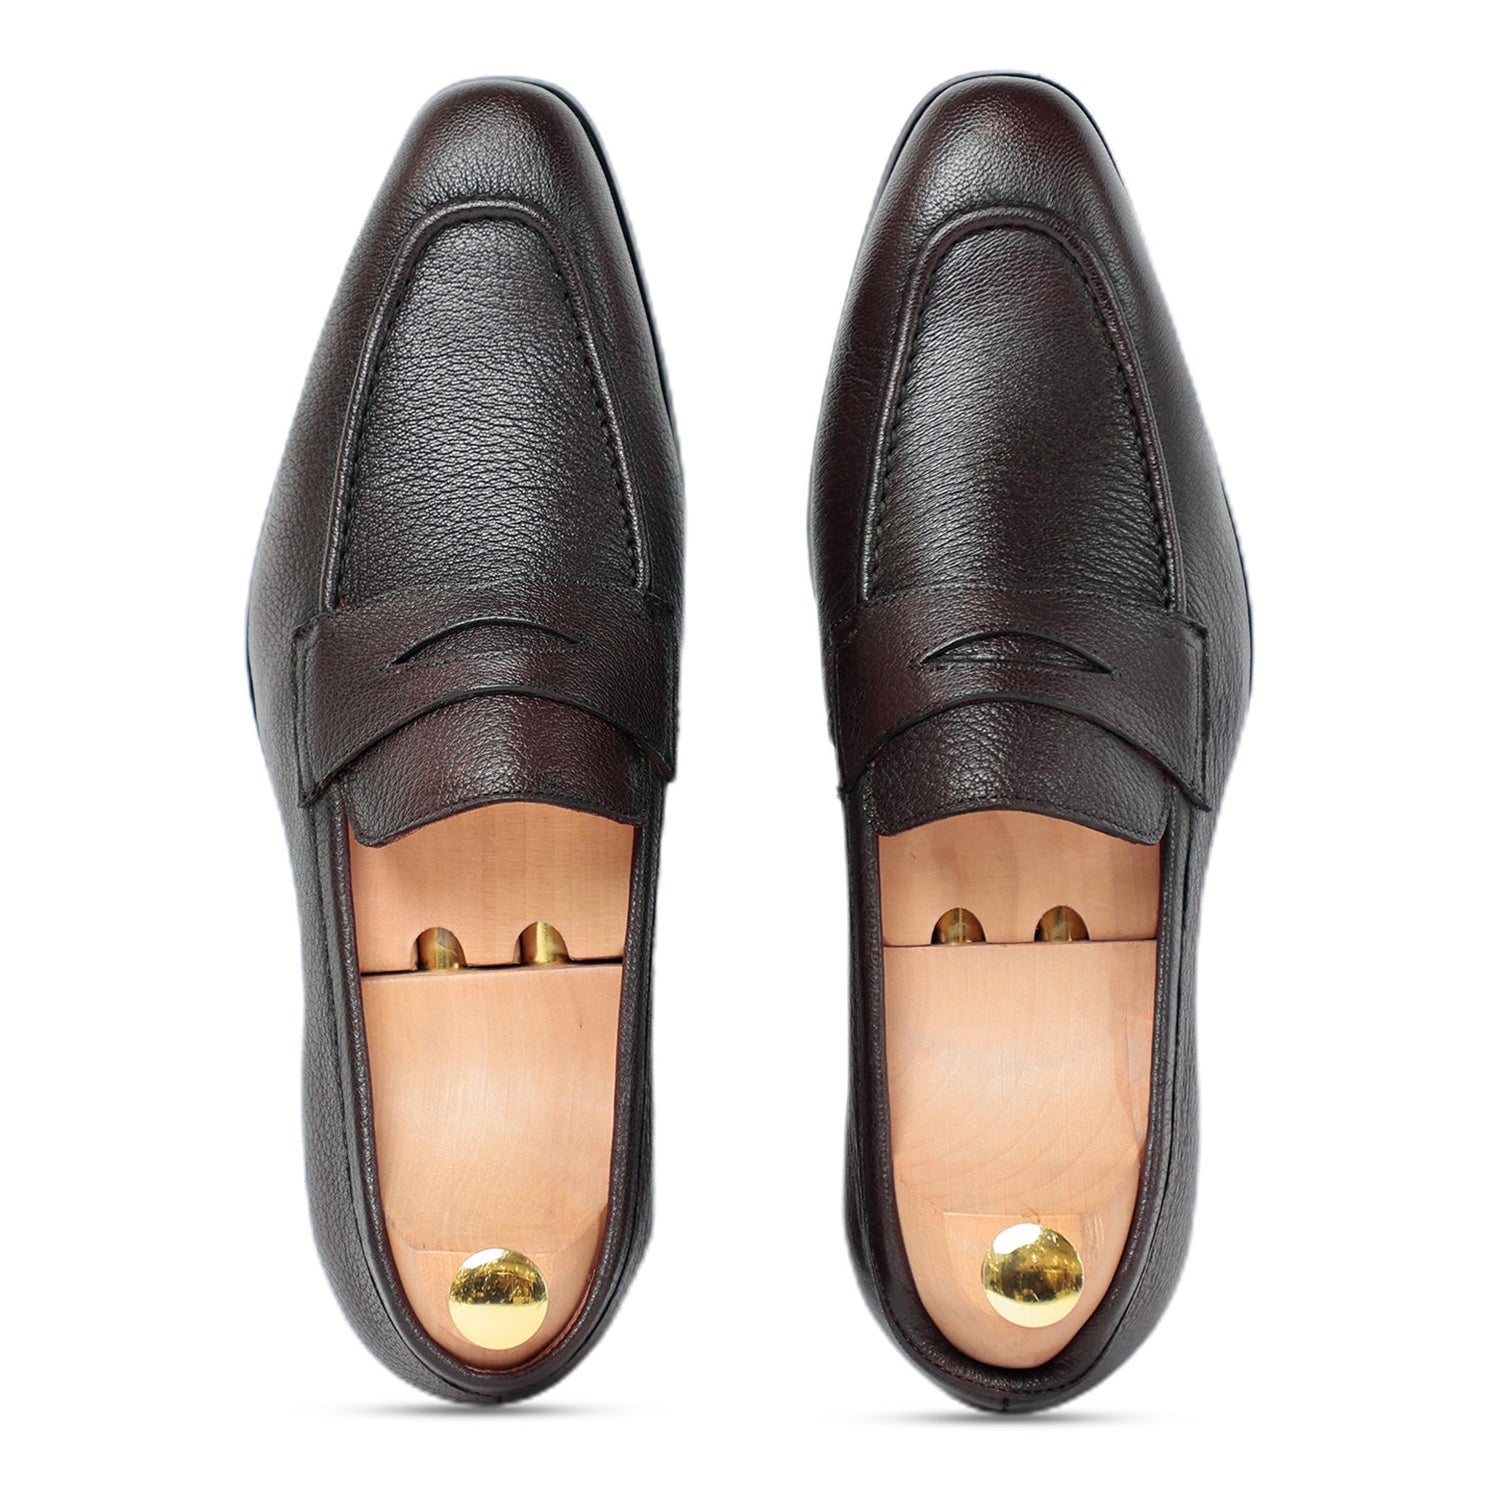 Ripper Grain Brown Penny Loafer